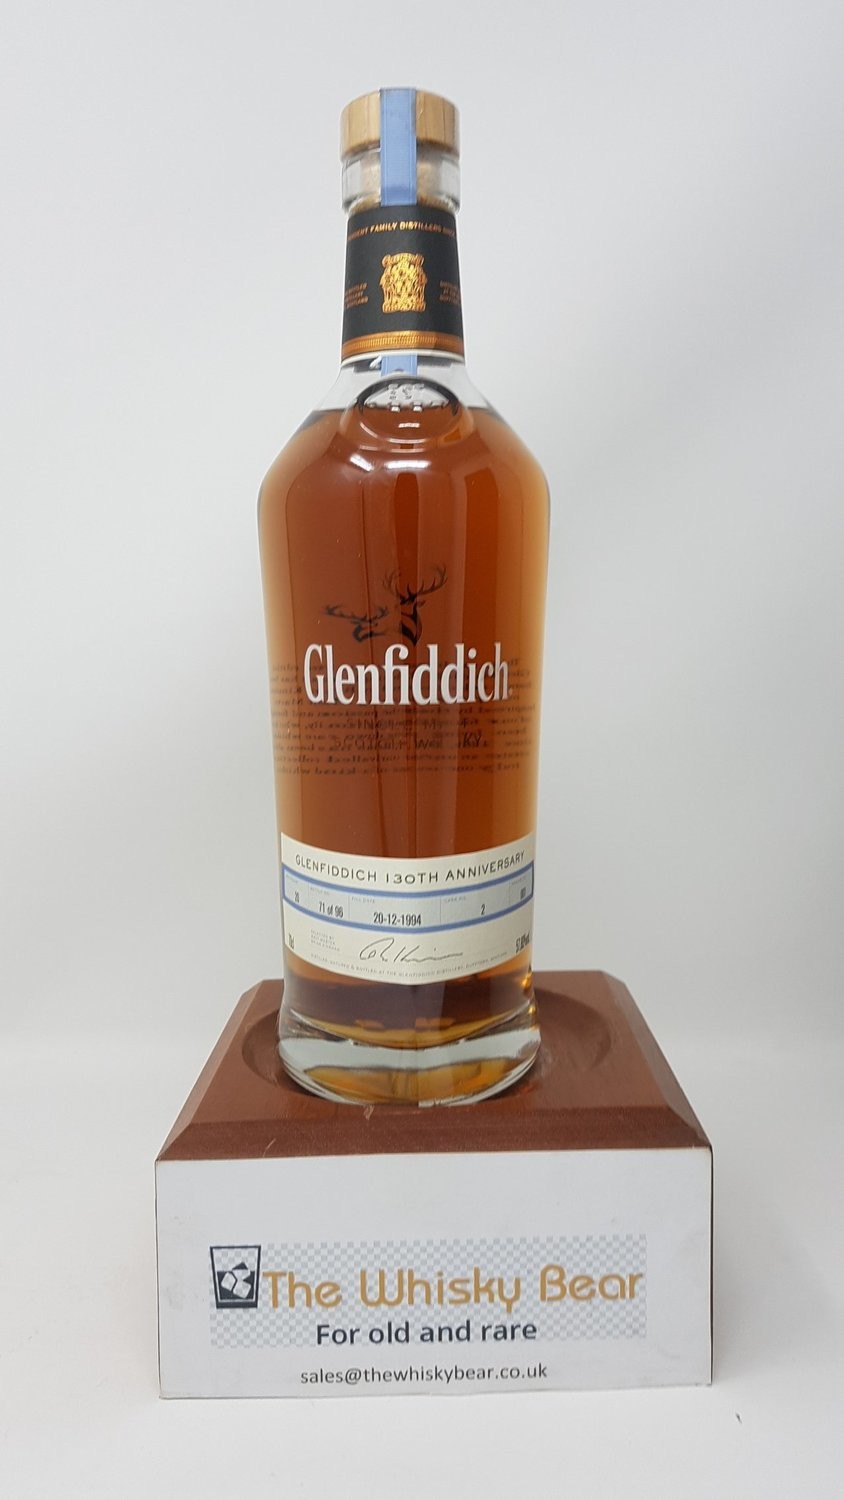 GLENFIDDICH 20 YEAR OLD 130TH ANNIVERSARY CASK WHISKY RELEASE No 1 CASK 2.  2014